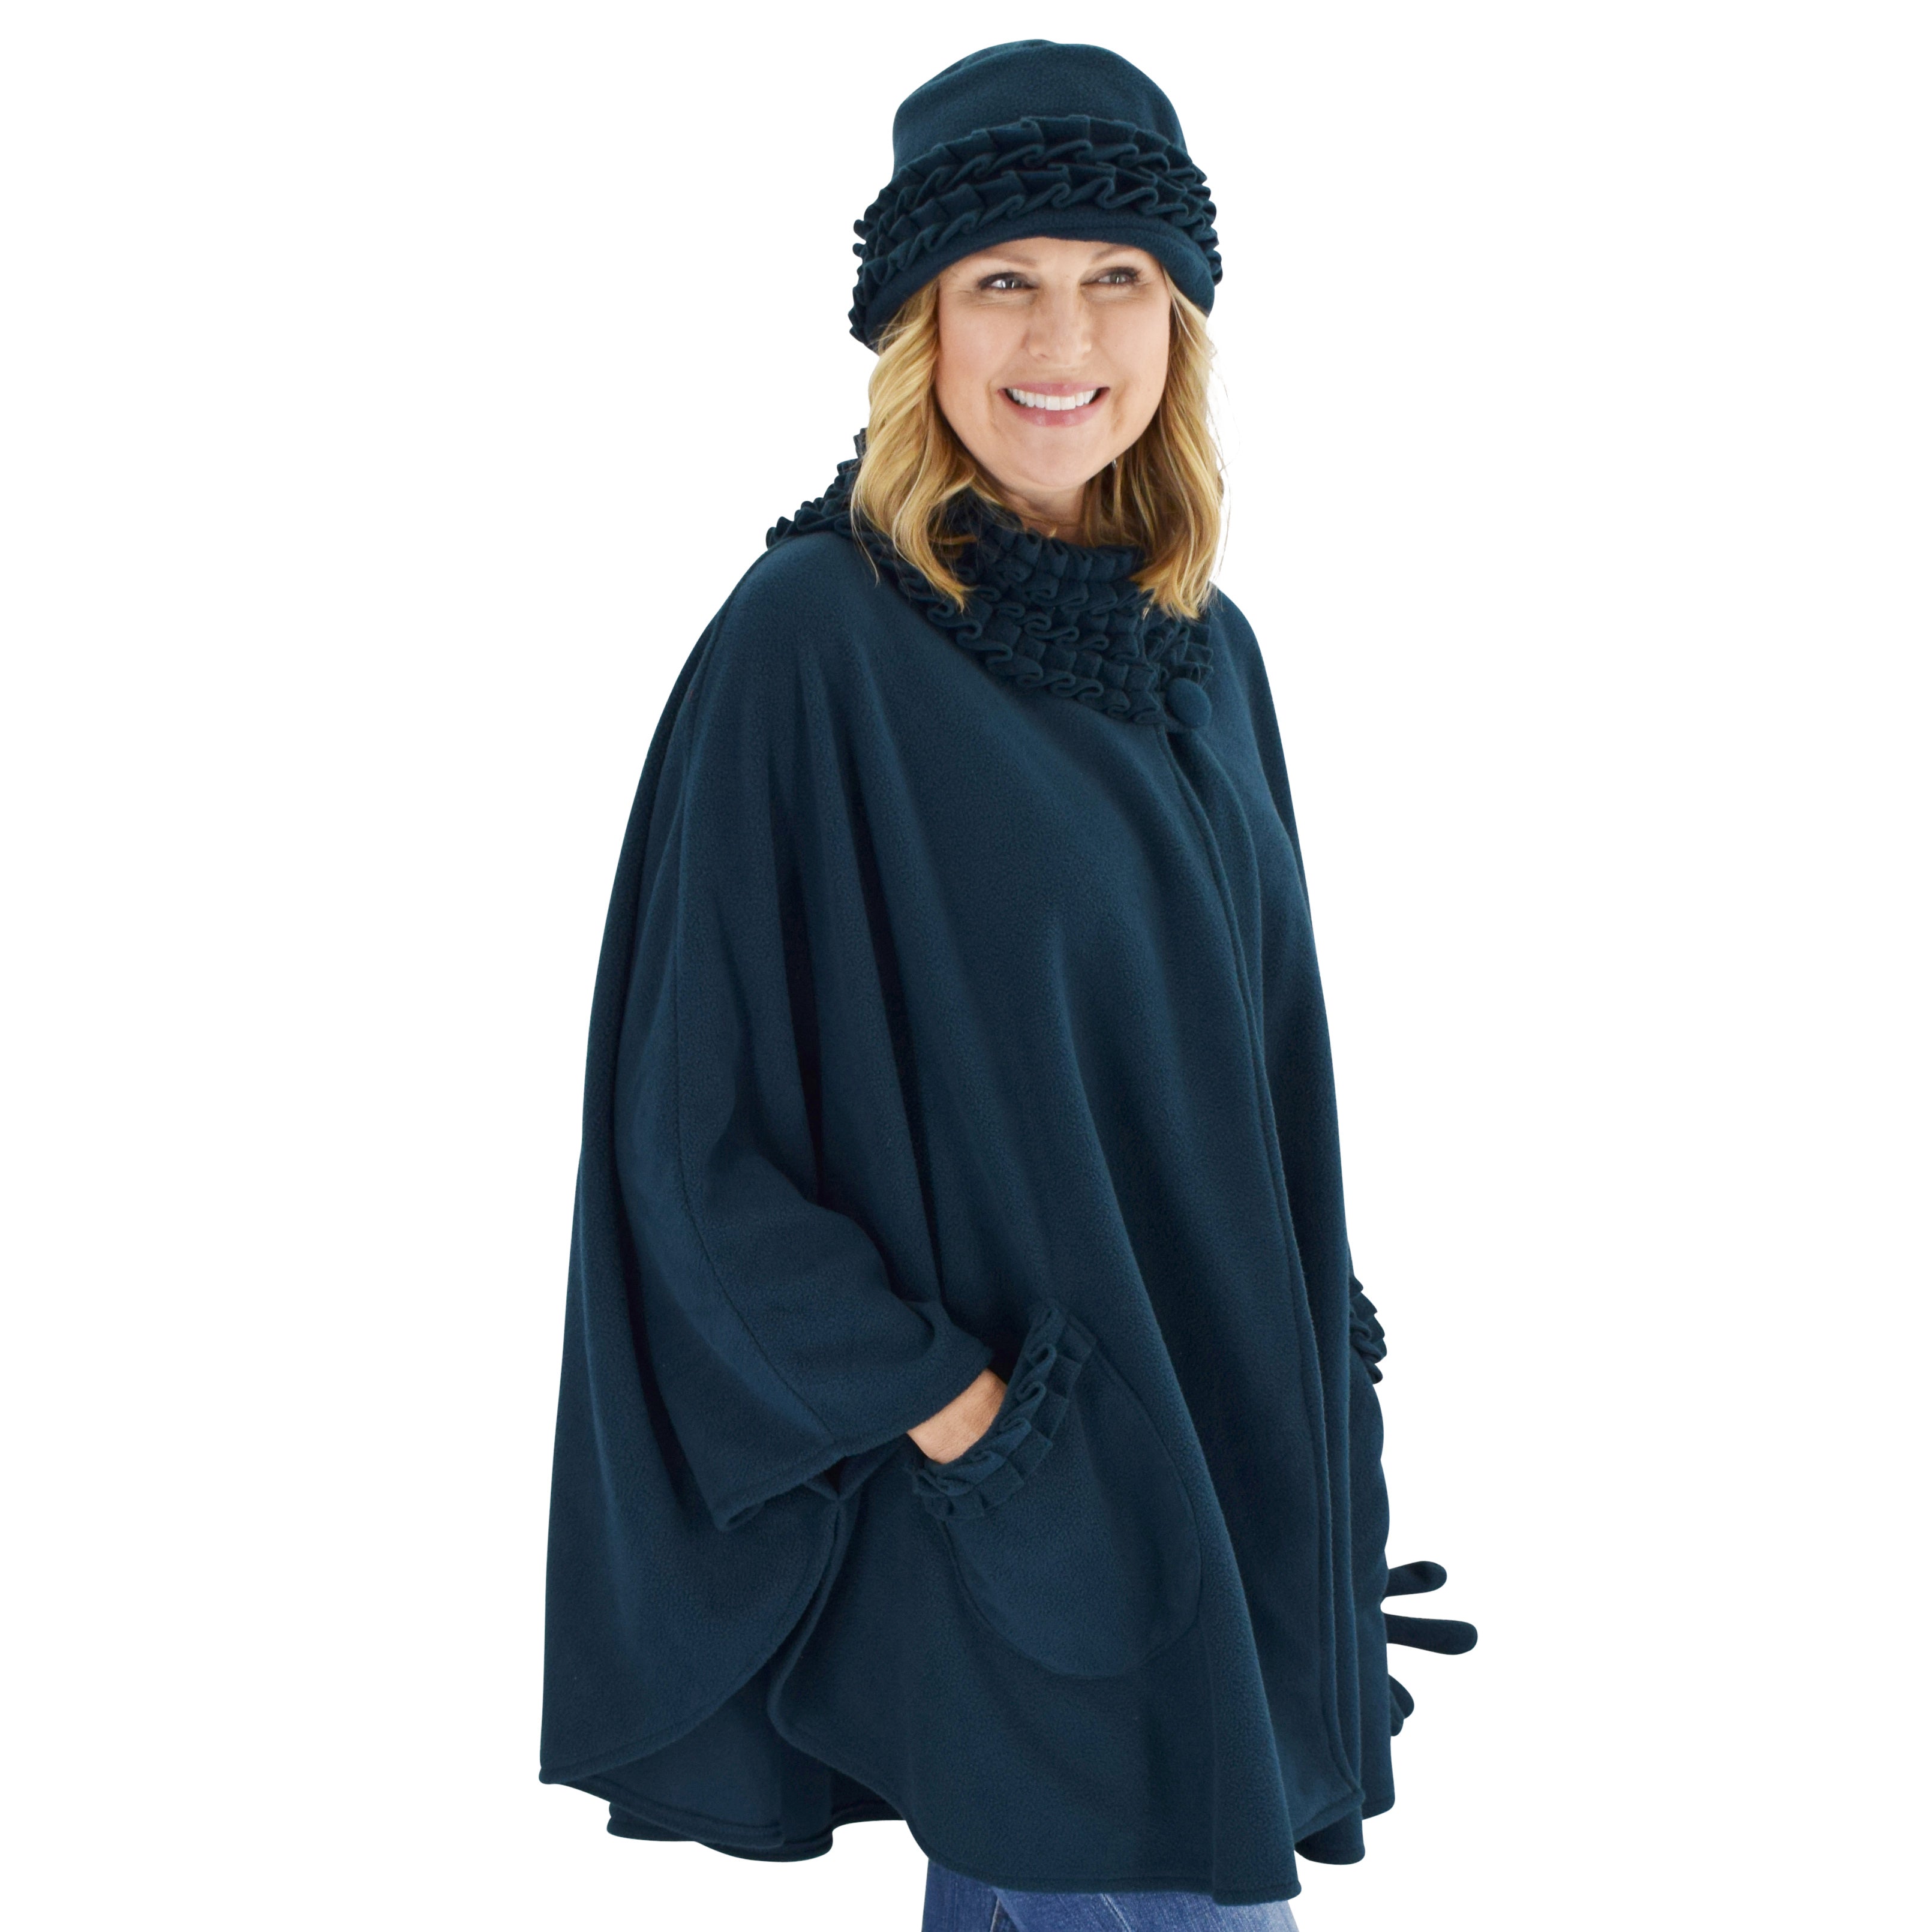 Le Moda Women's Ruffed collar Fleece Wrap with Matching Gloves and Hat - One Size Fits All at Linda Anderson. color_teal